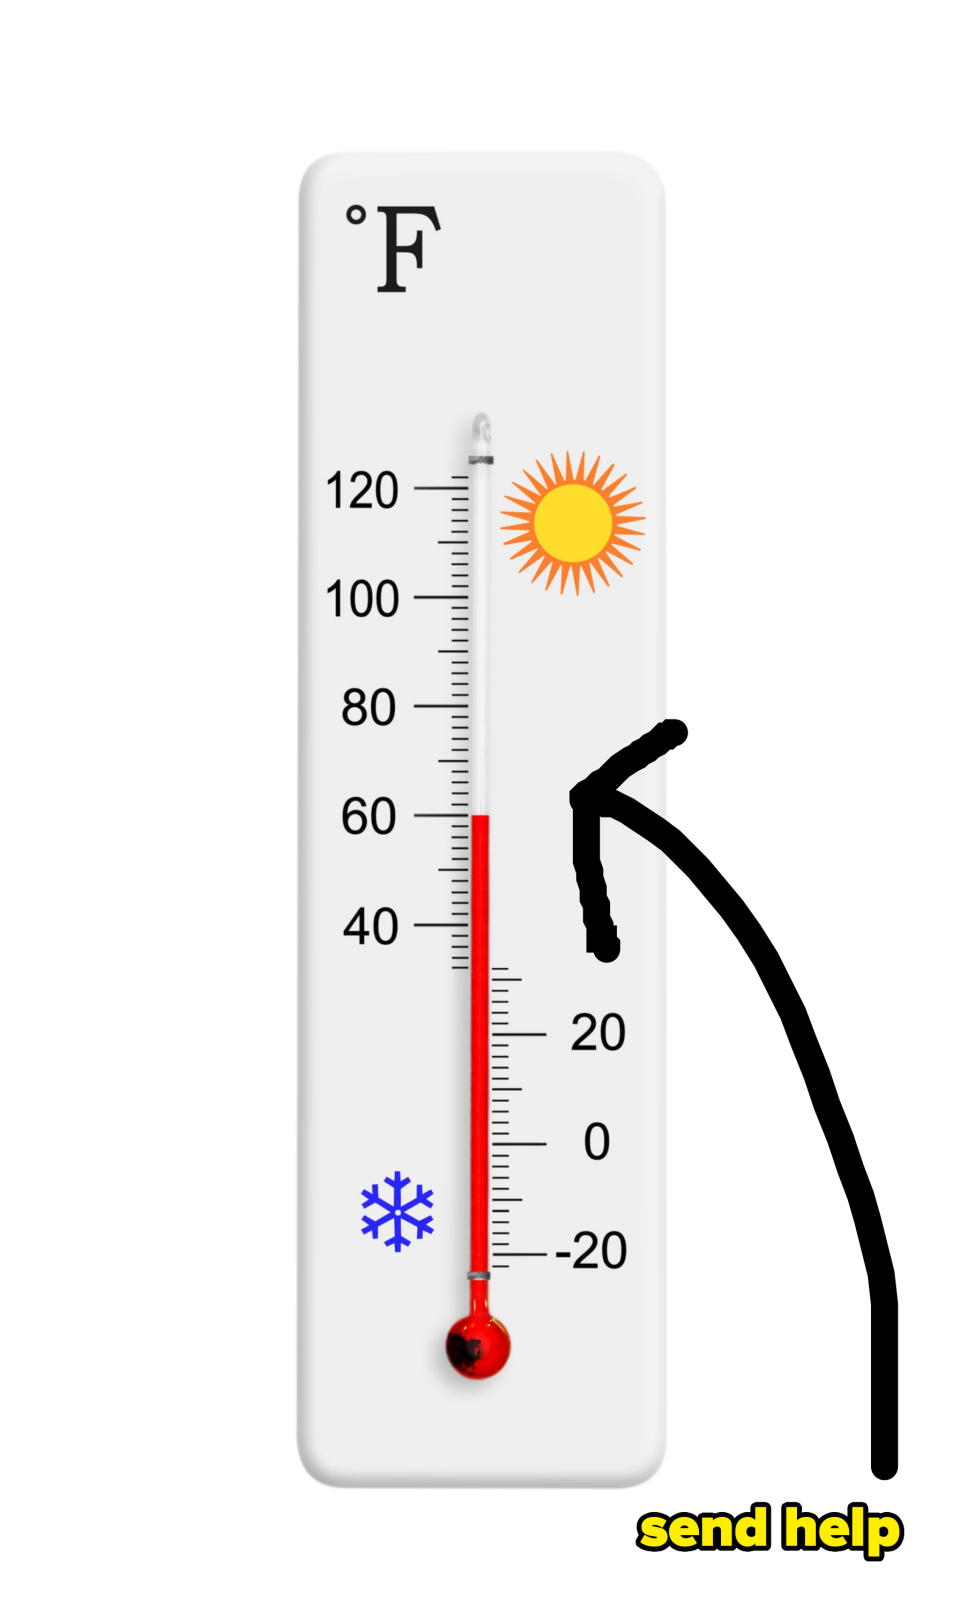 thermometer showing 60 degress